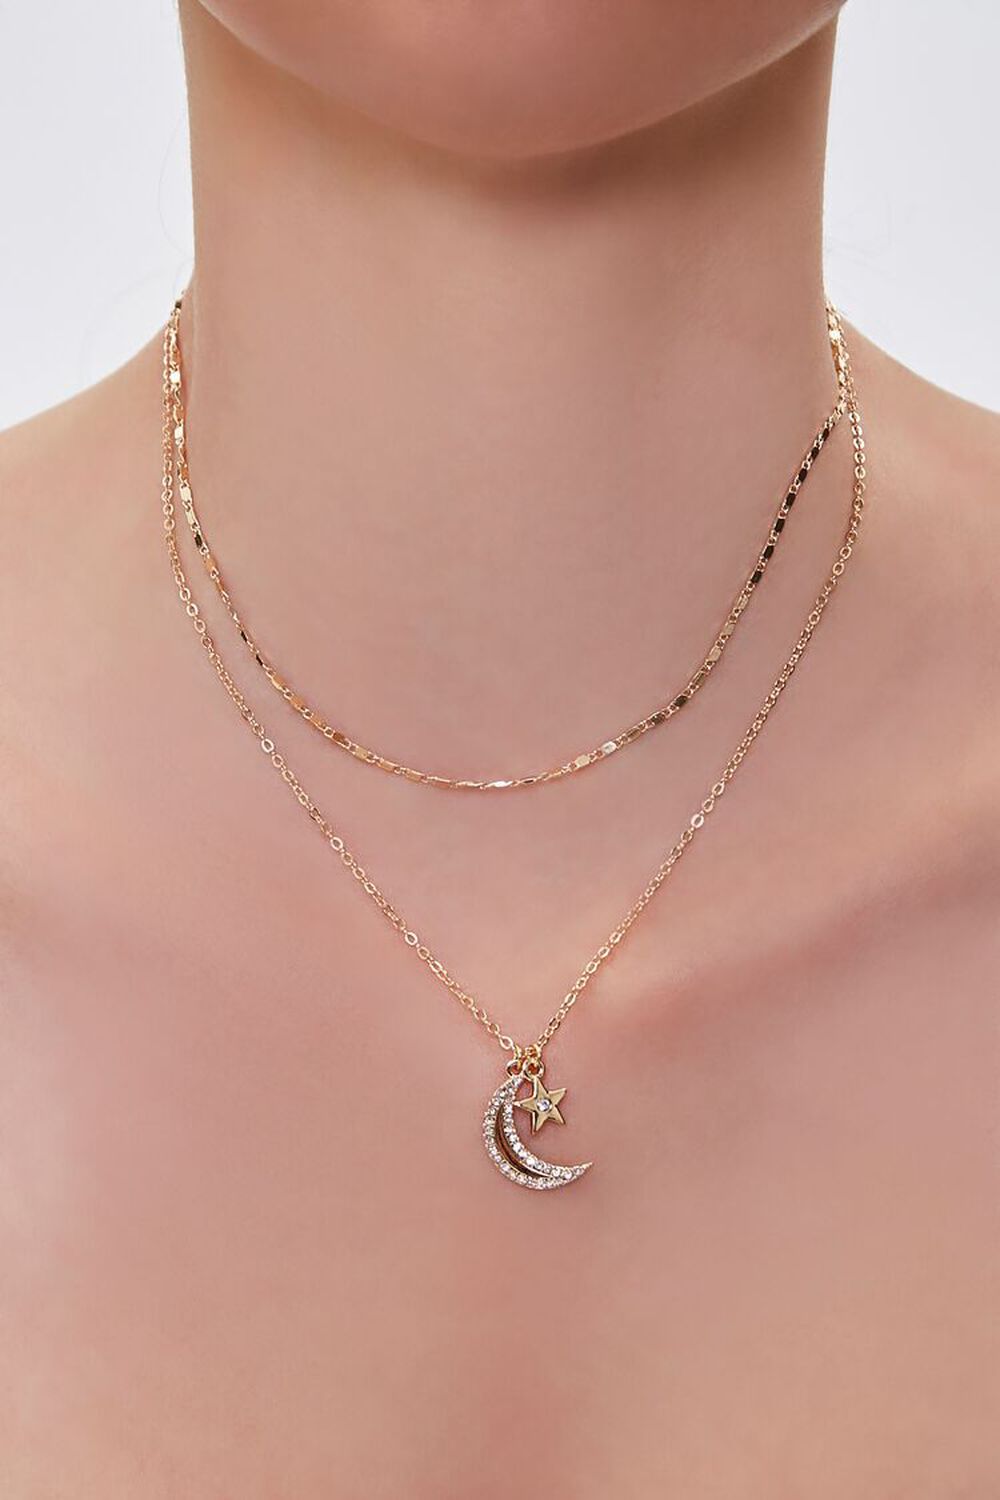 GOLD Layered Crescent Moon Pendant Necklace, image 1